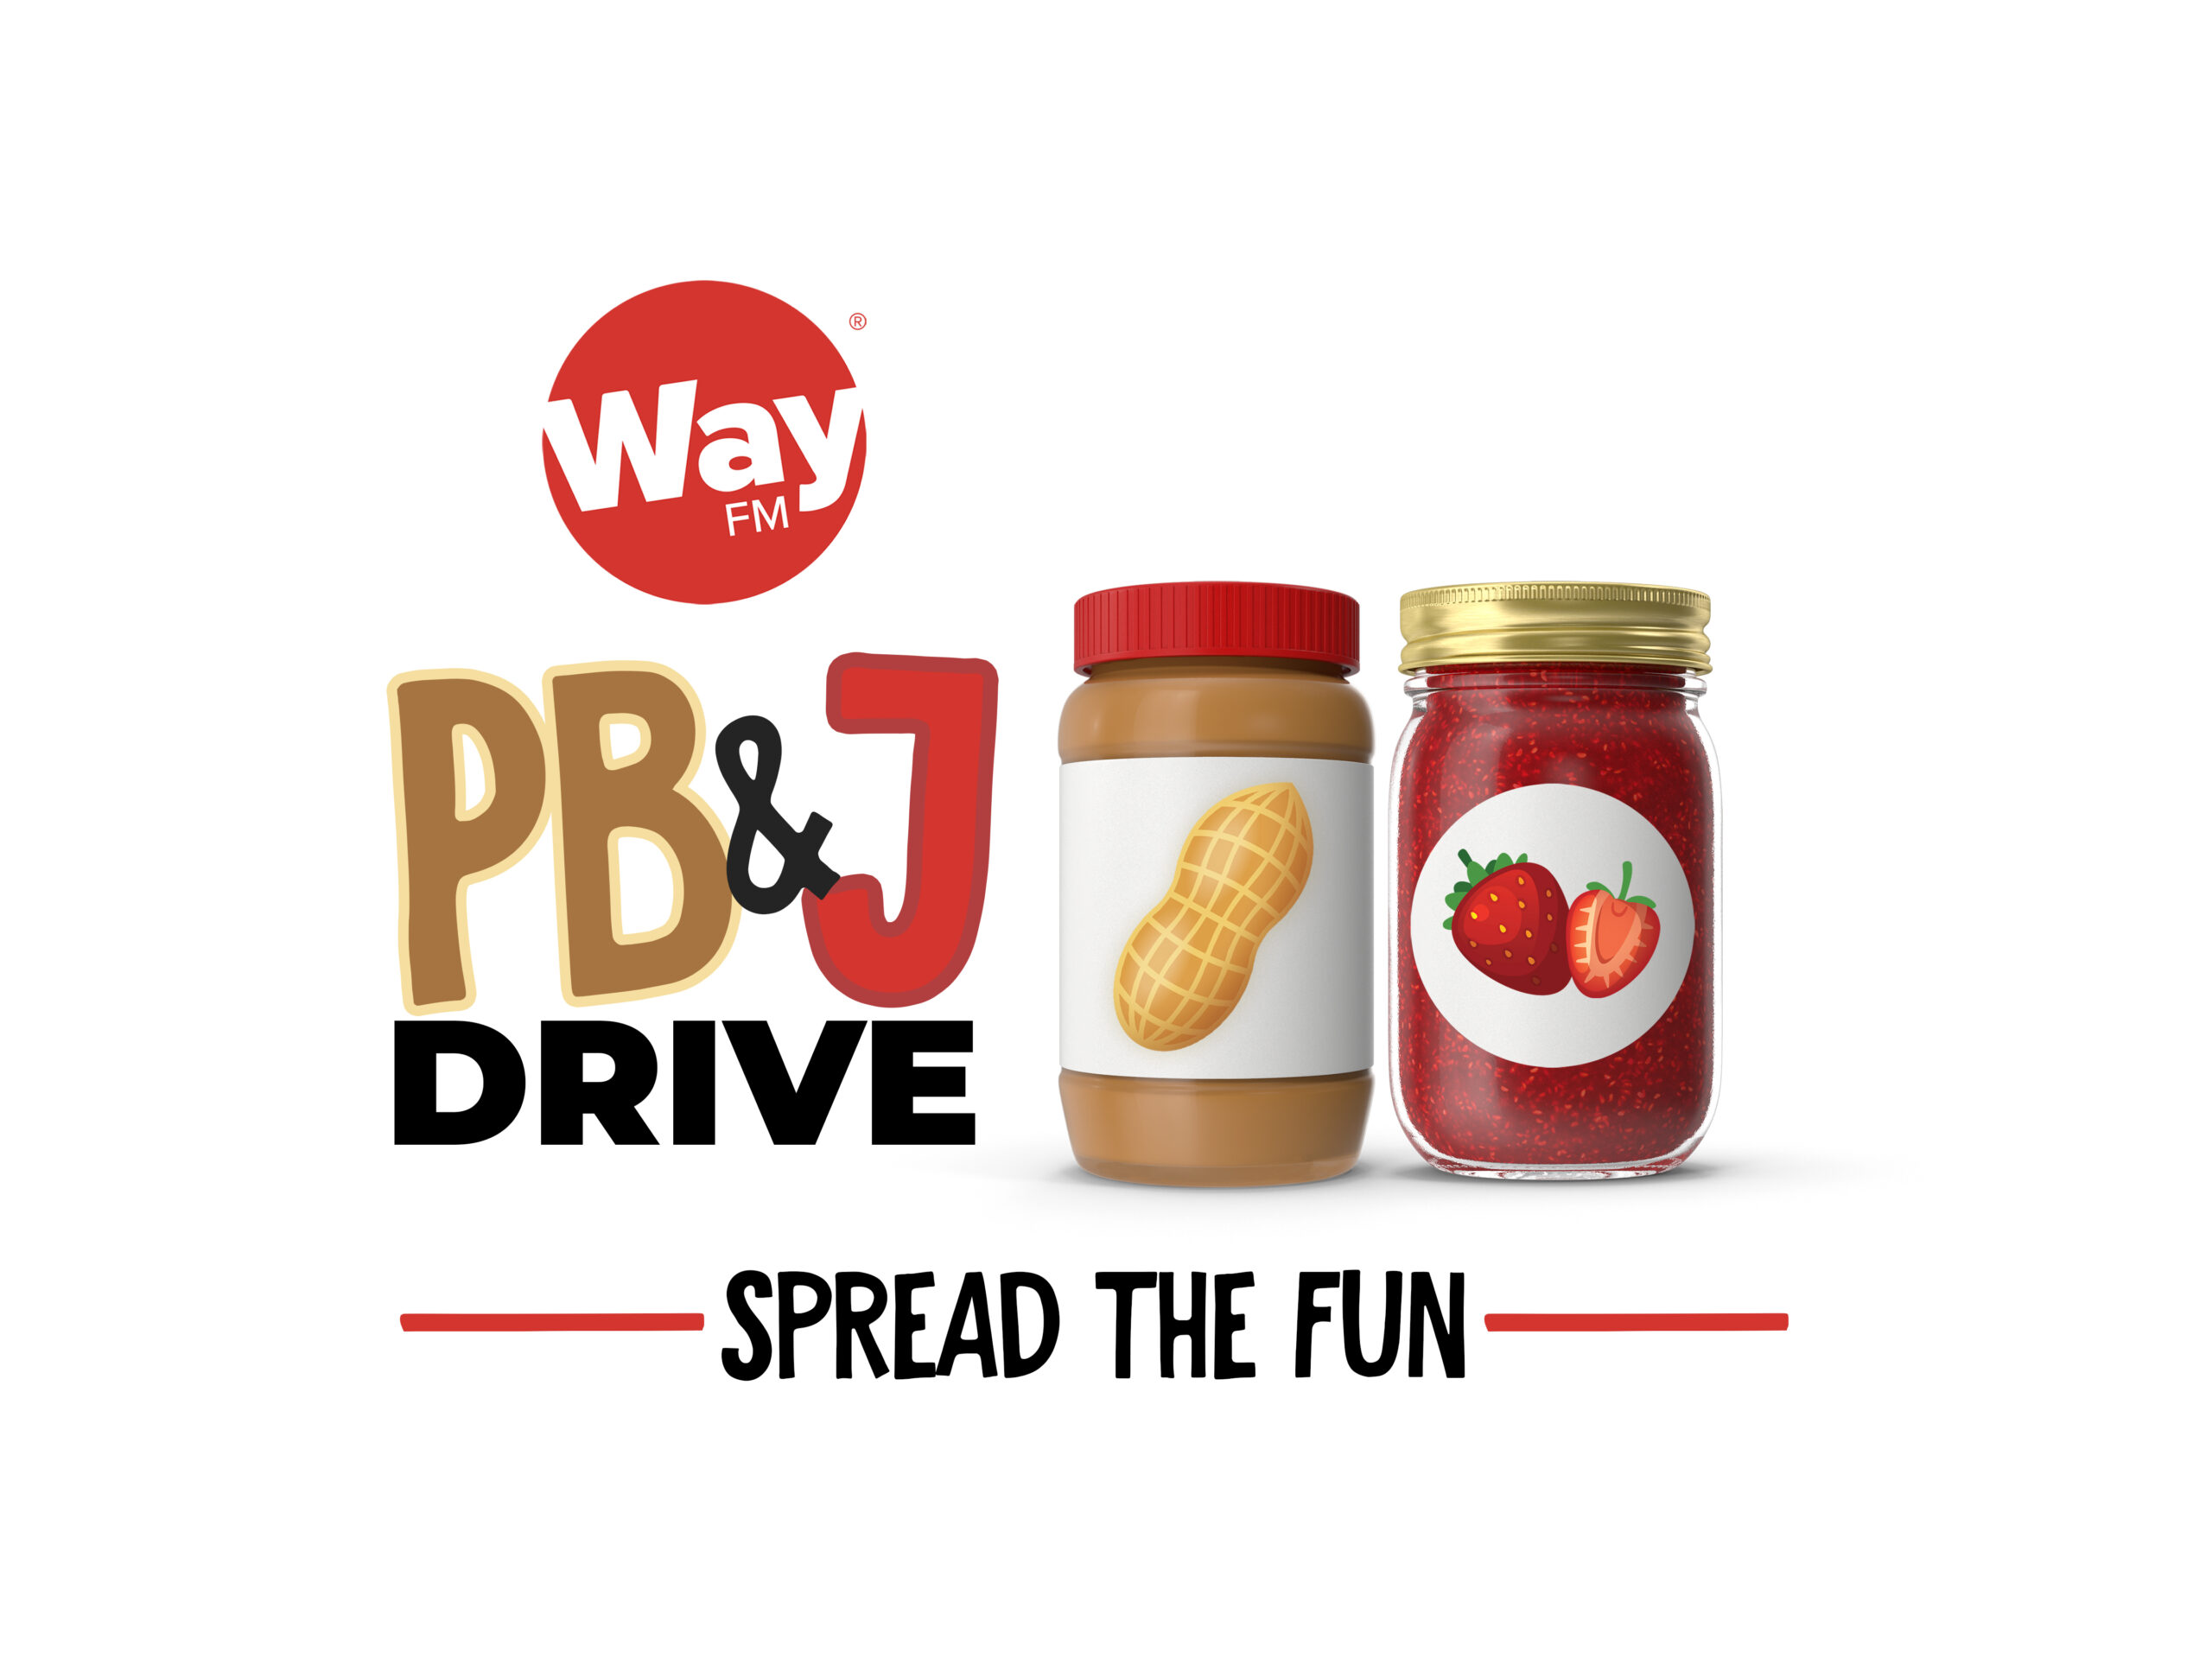 Peanut Butter and Jelly Drive. Spread the Fun!